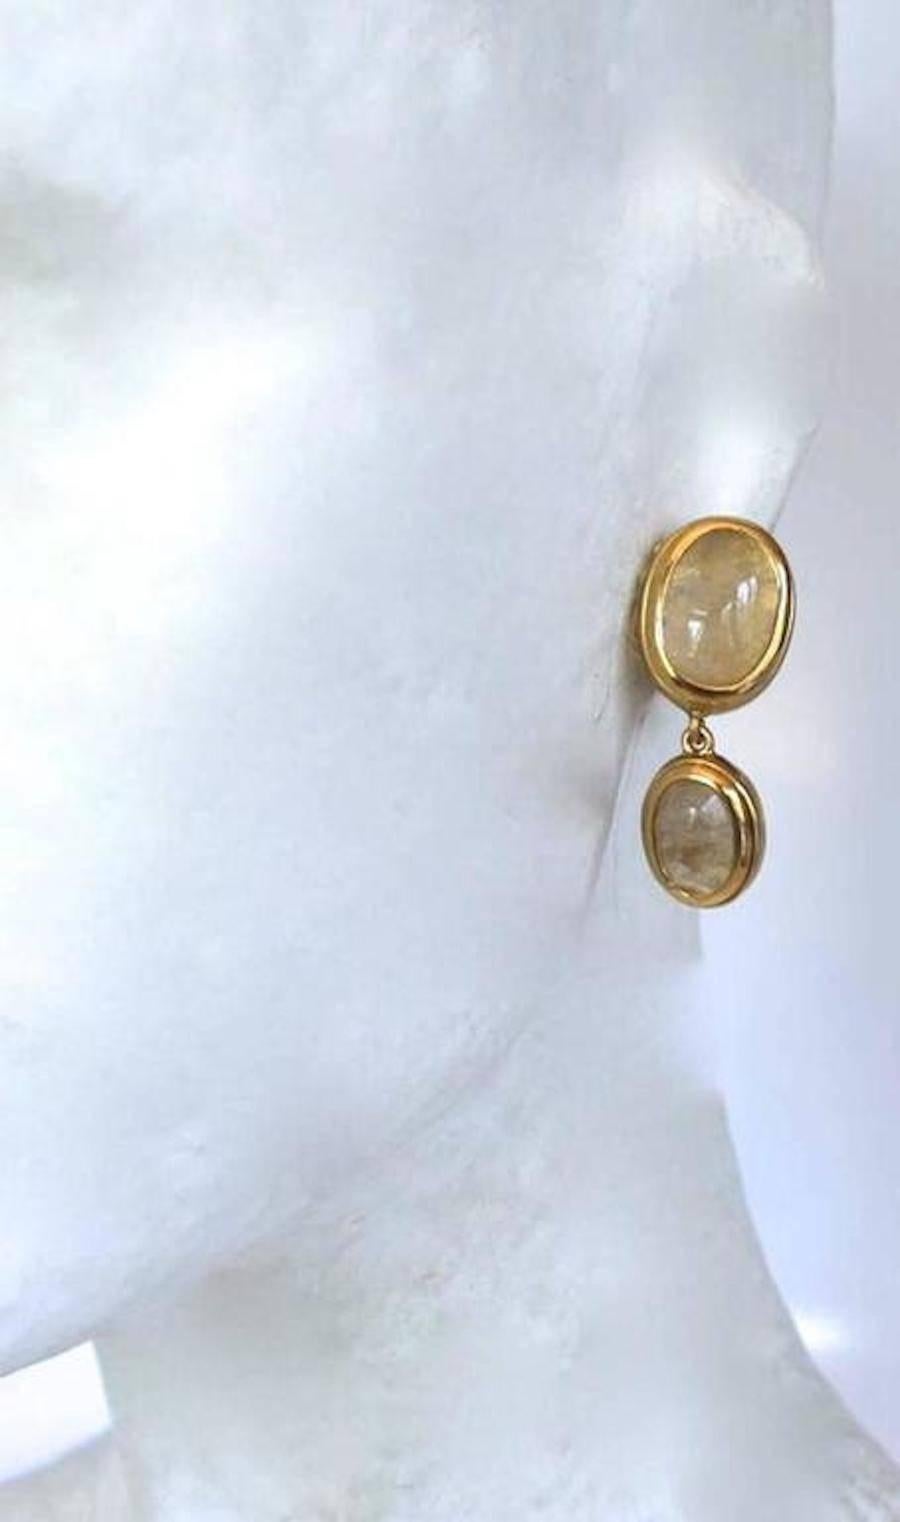 Rock crystal set in gold plated bronze clip earrings from Goossens Paris.